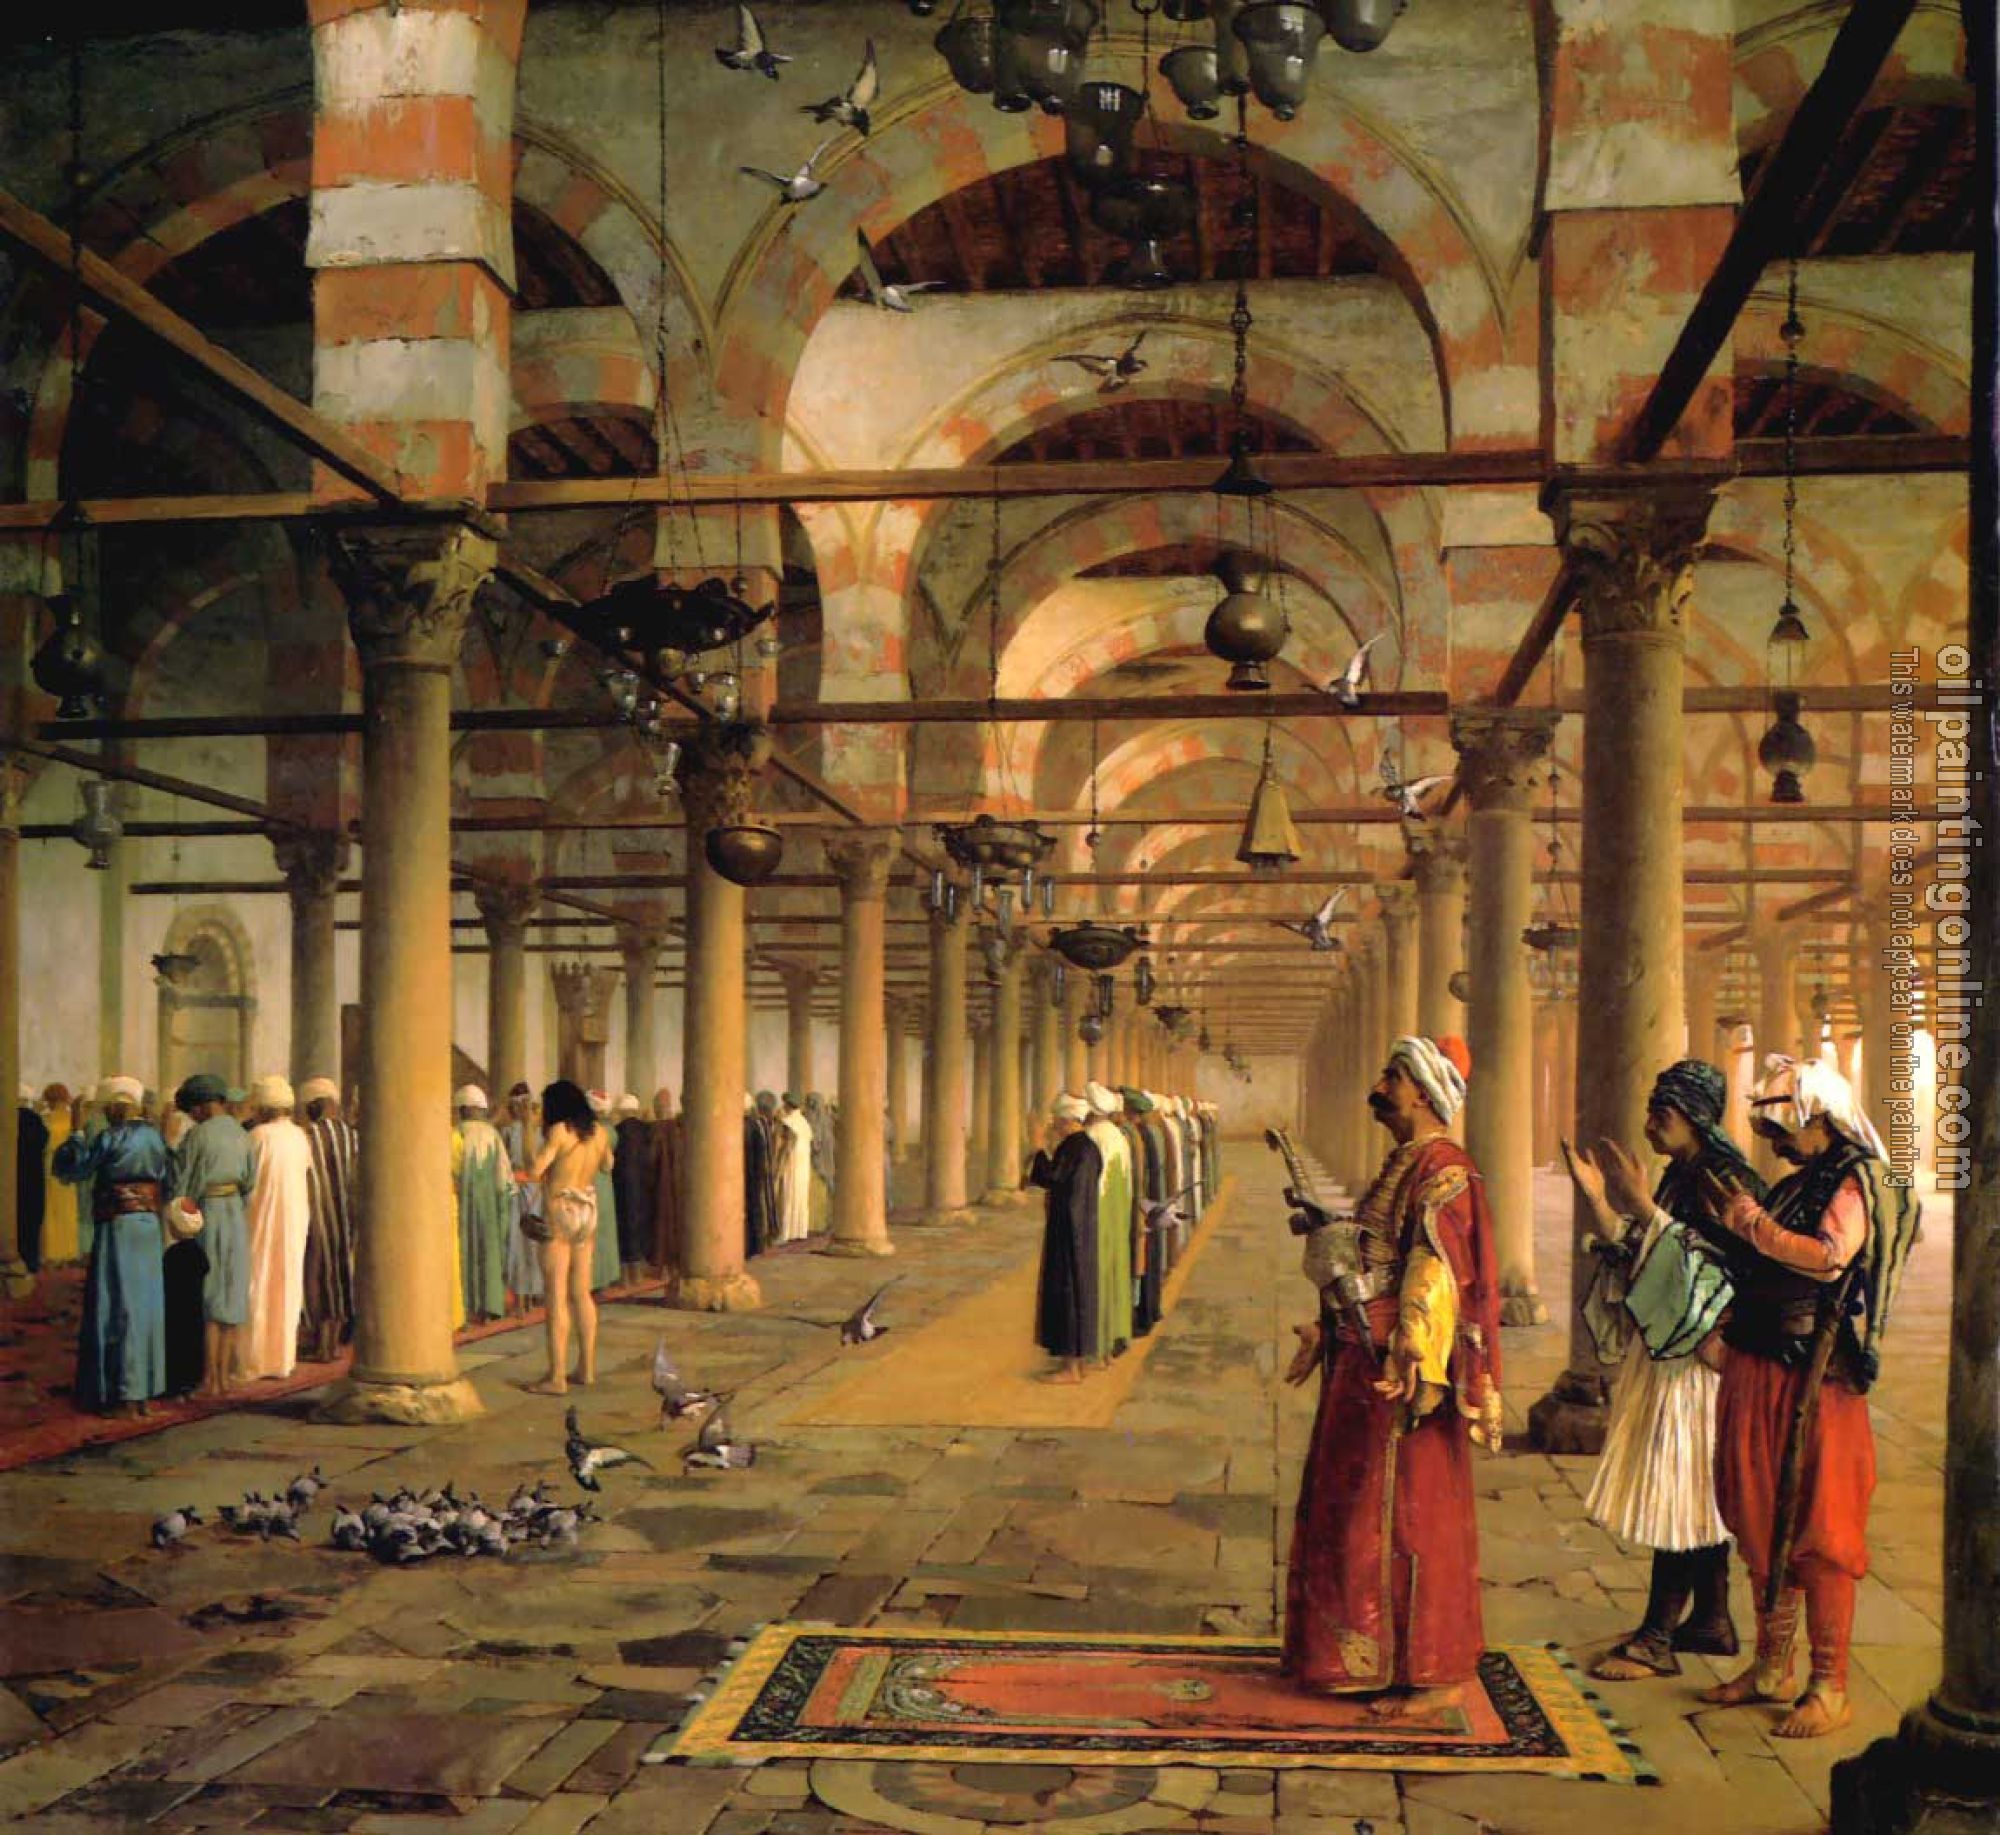 Gerome, Jean-Leon - Public Prayer in the Mosque of Amr, Cairo